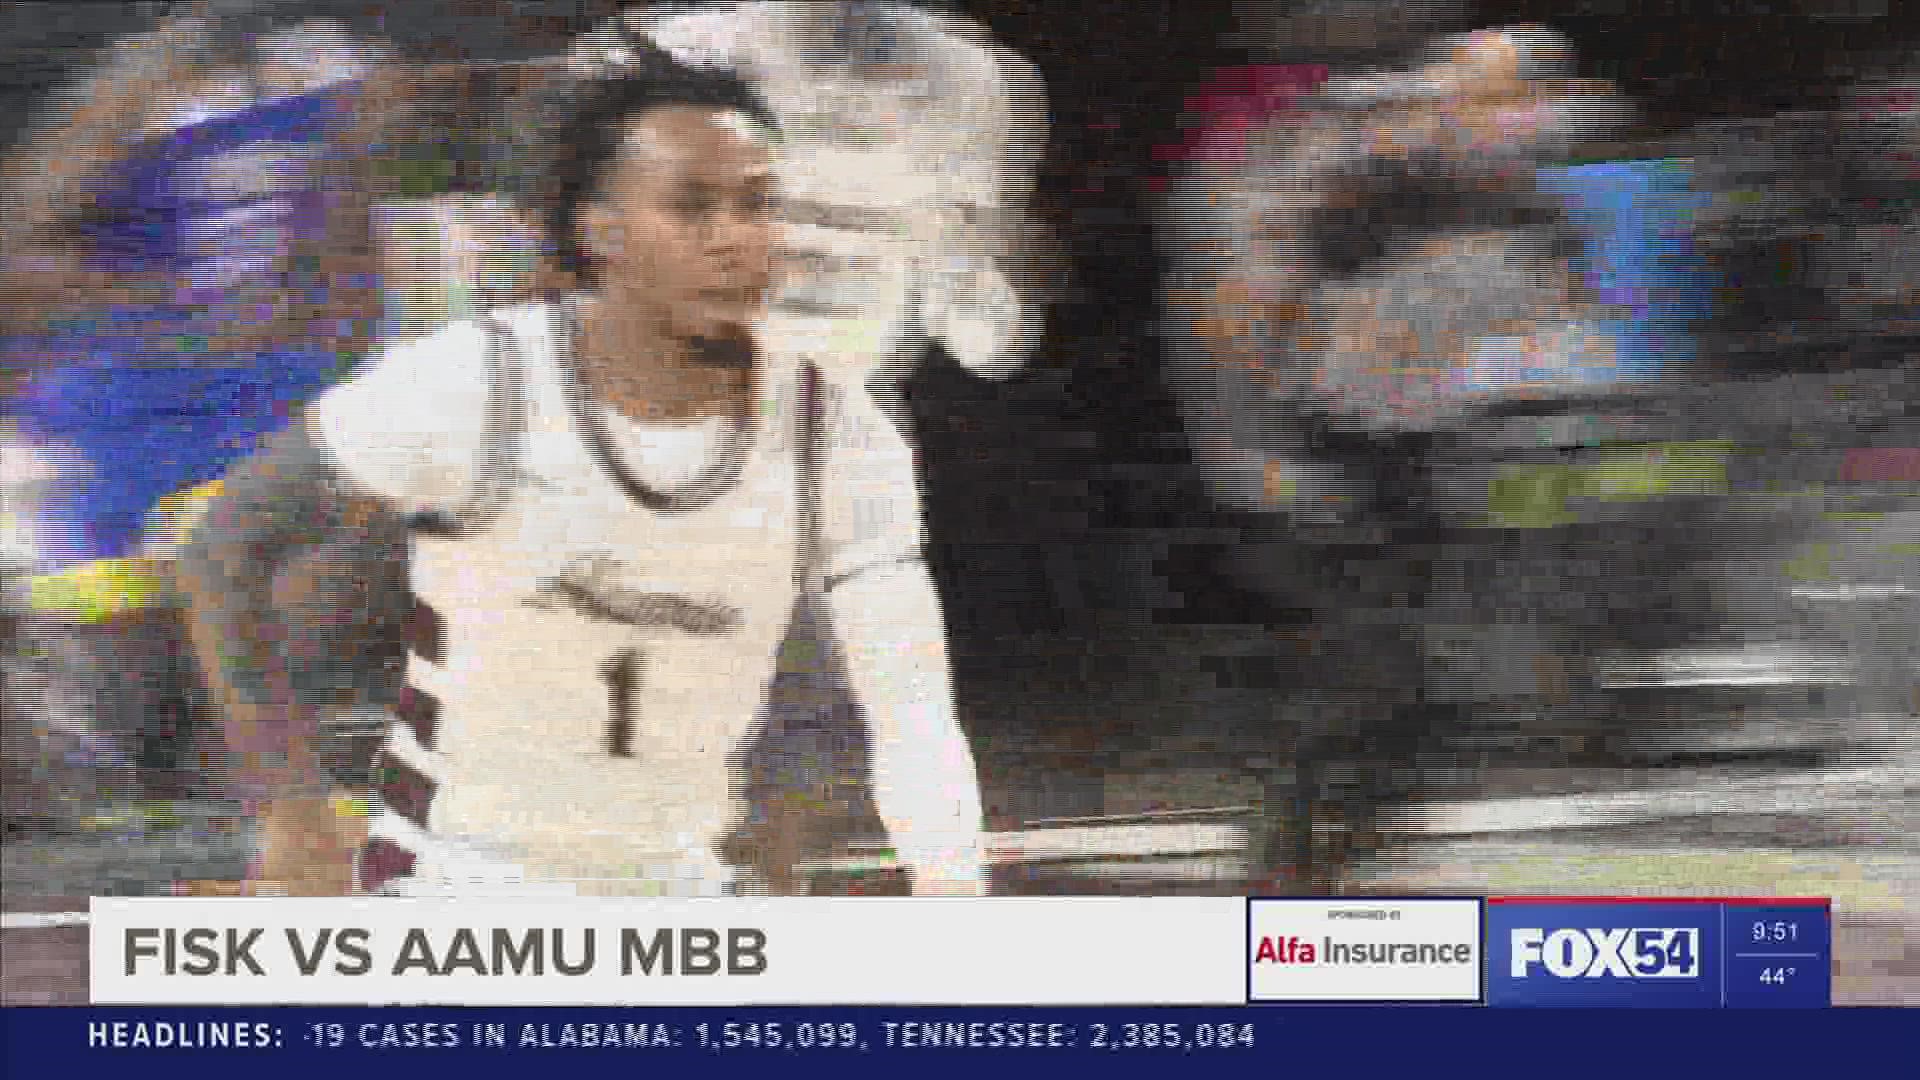 After a competitive beginning to the first half, AAMU took a 12-point lead into the locker room at halftime and defeated NAIA opponent Fisk University 71-55